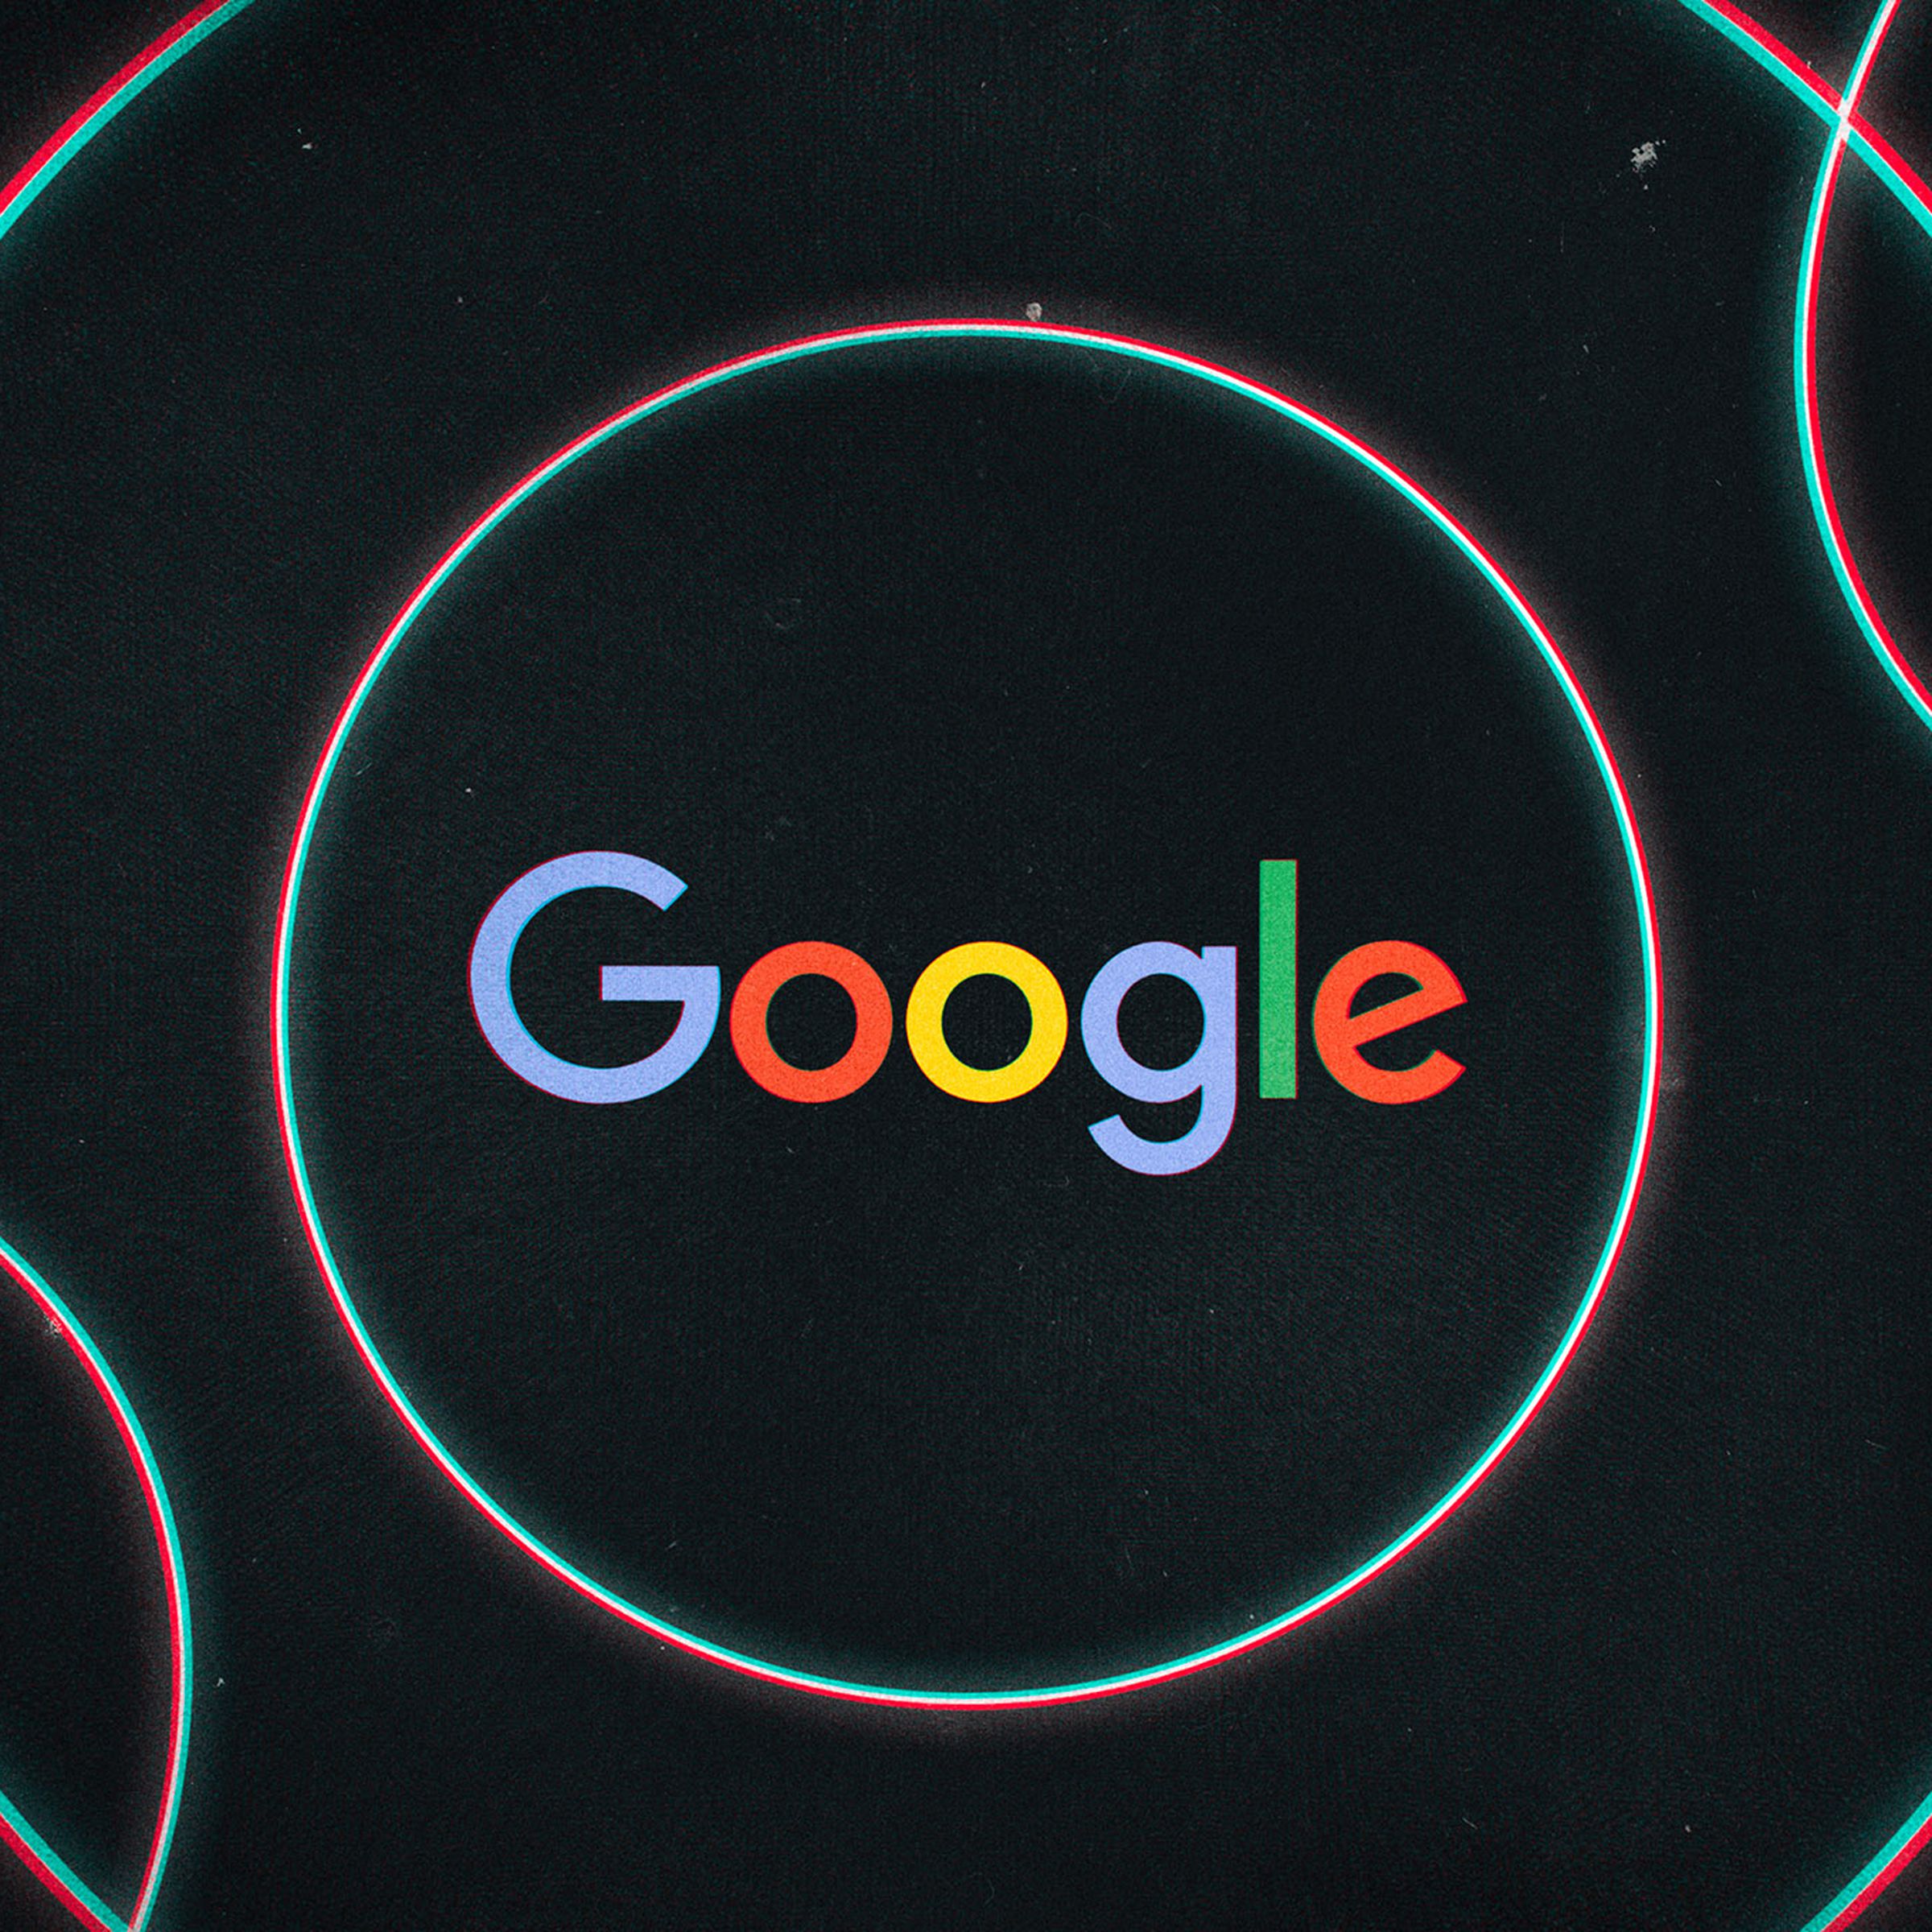 A Google logo sits at the center of ominous concentric circles